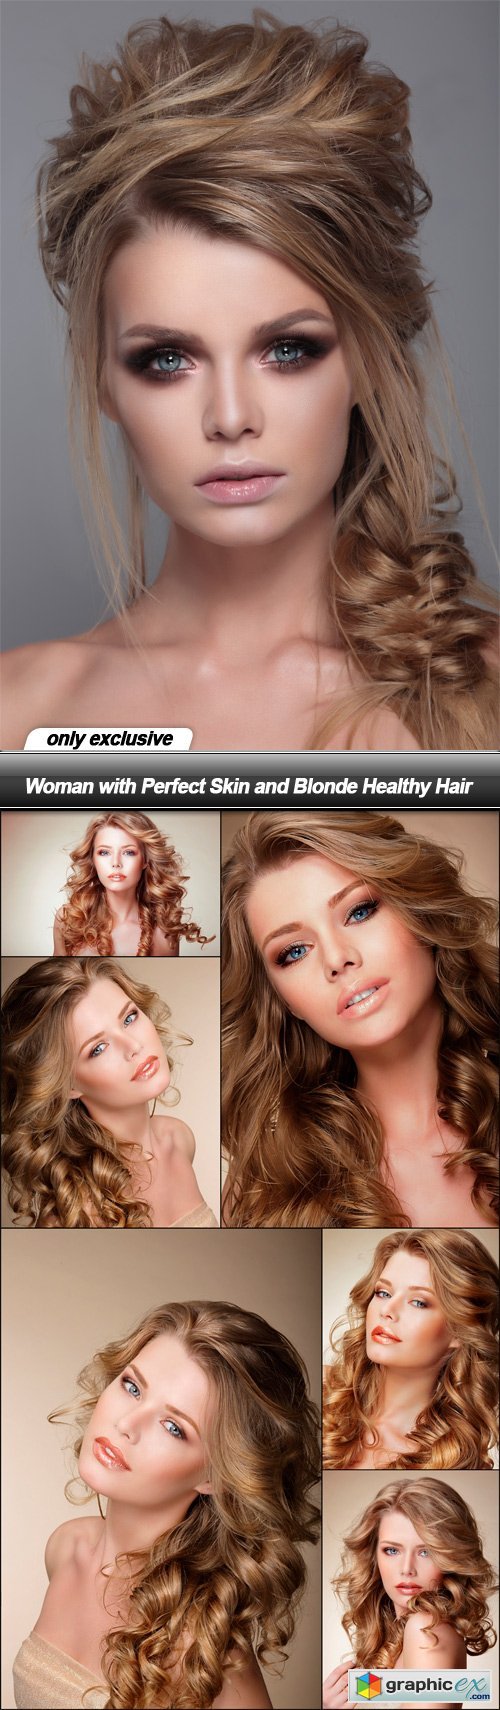 Woman with Perfect Skin and Blonde Healthy Hair - 7 UHQ JPEG